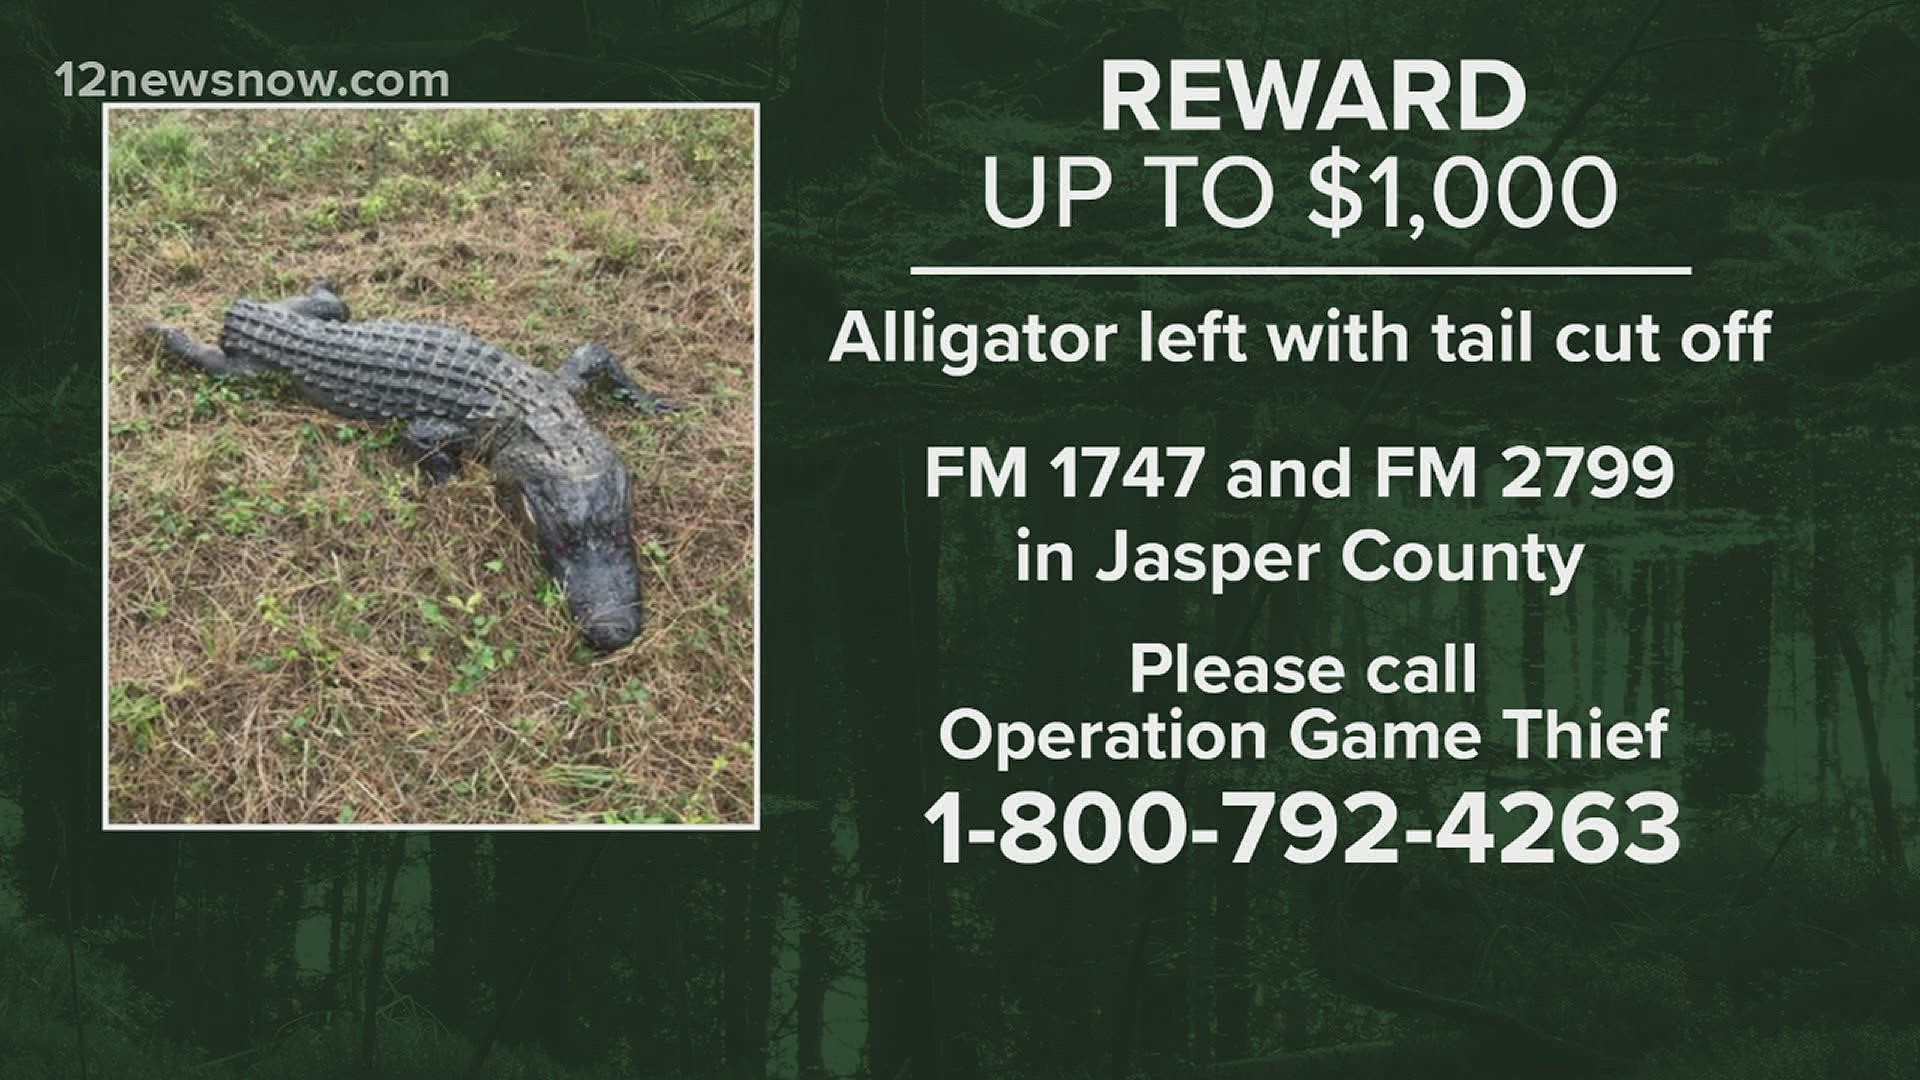 The gator in the video was still alive, but totally missing his tail.